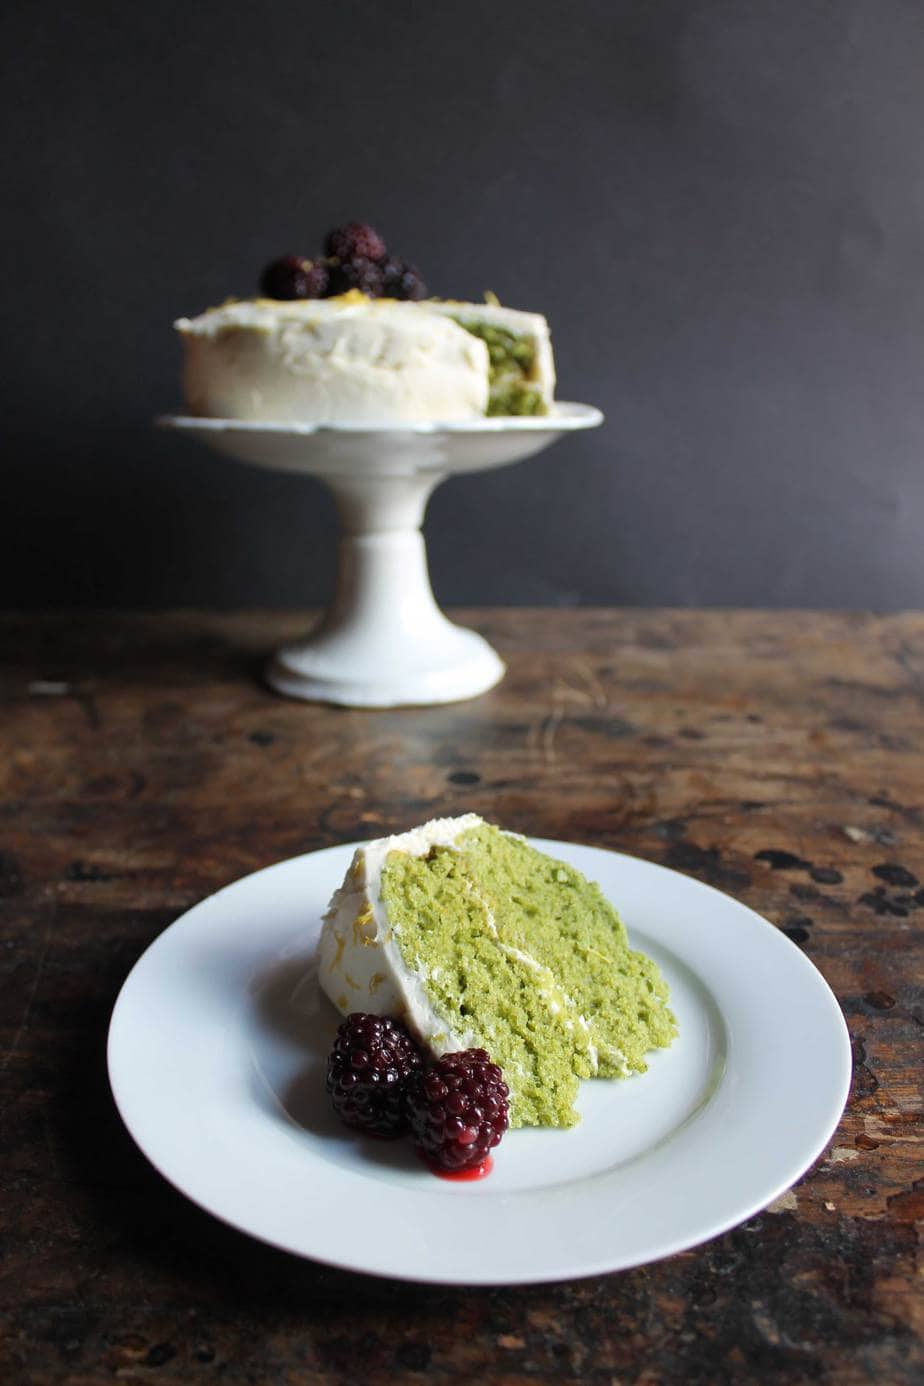 A slice of green Stinging Nettle Cake on a plate in front of the cake on a cake stand.